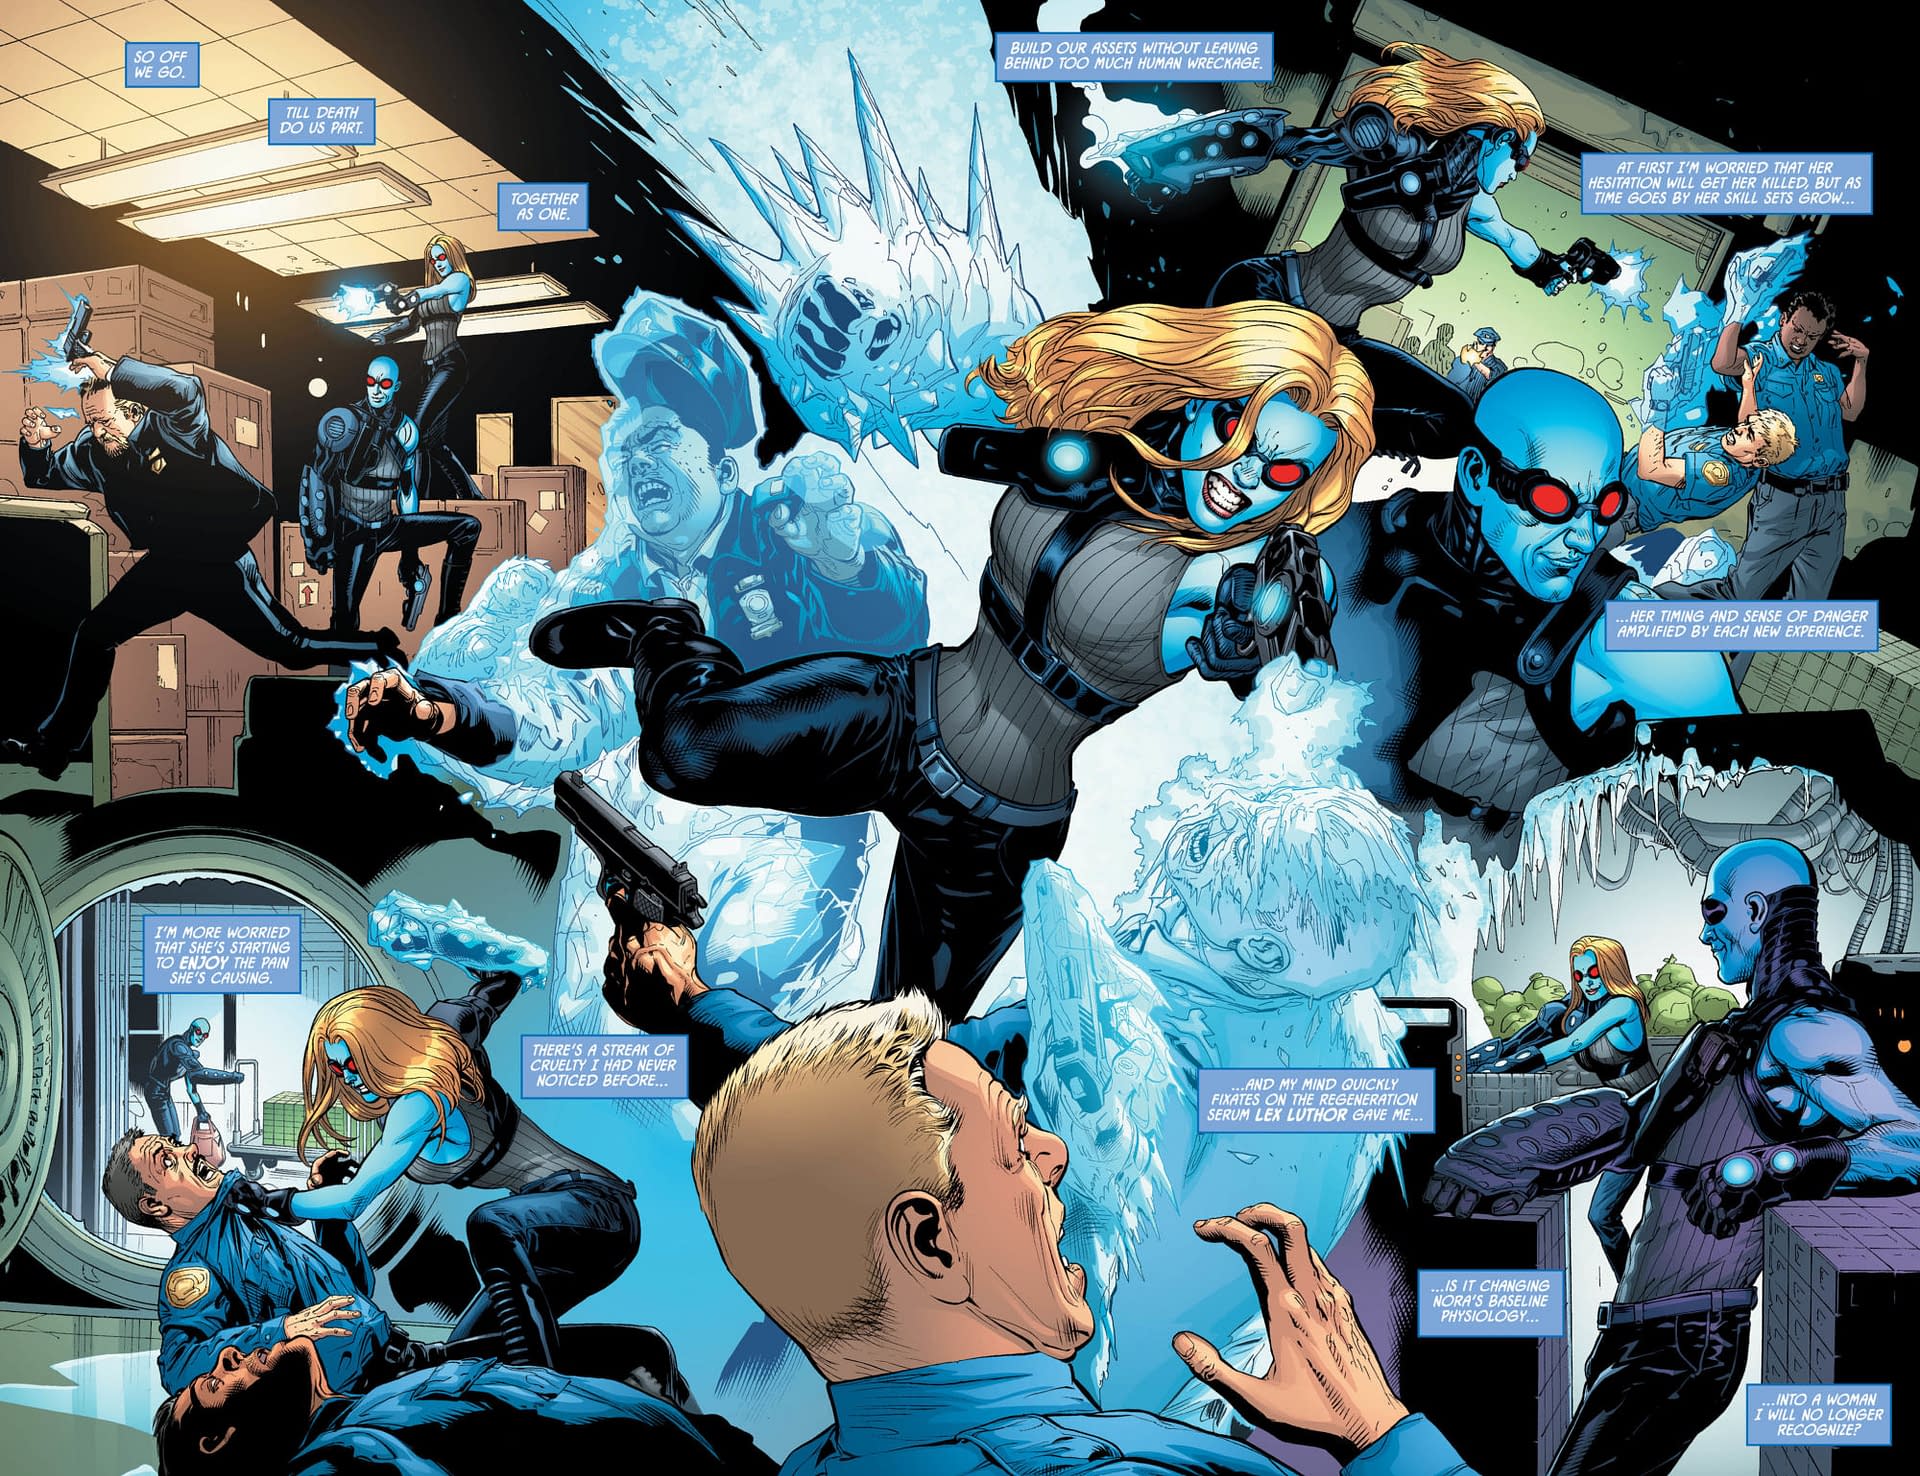 Mr. Freeze Learns to Be Careful What You Wish For in Detective Comics #1015 [Preview]